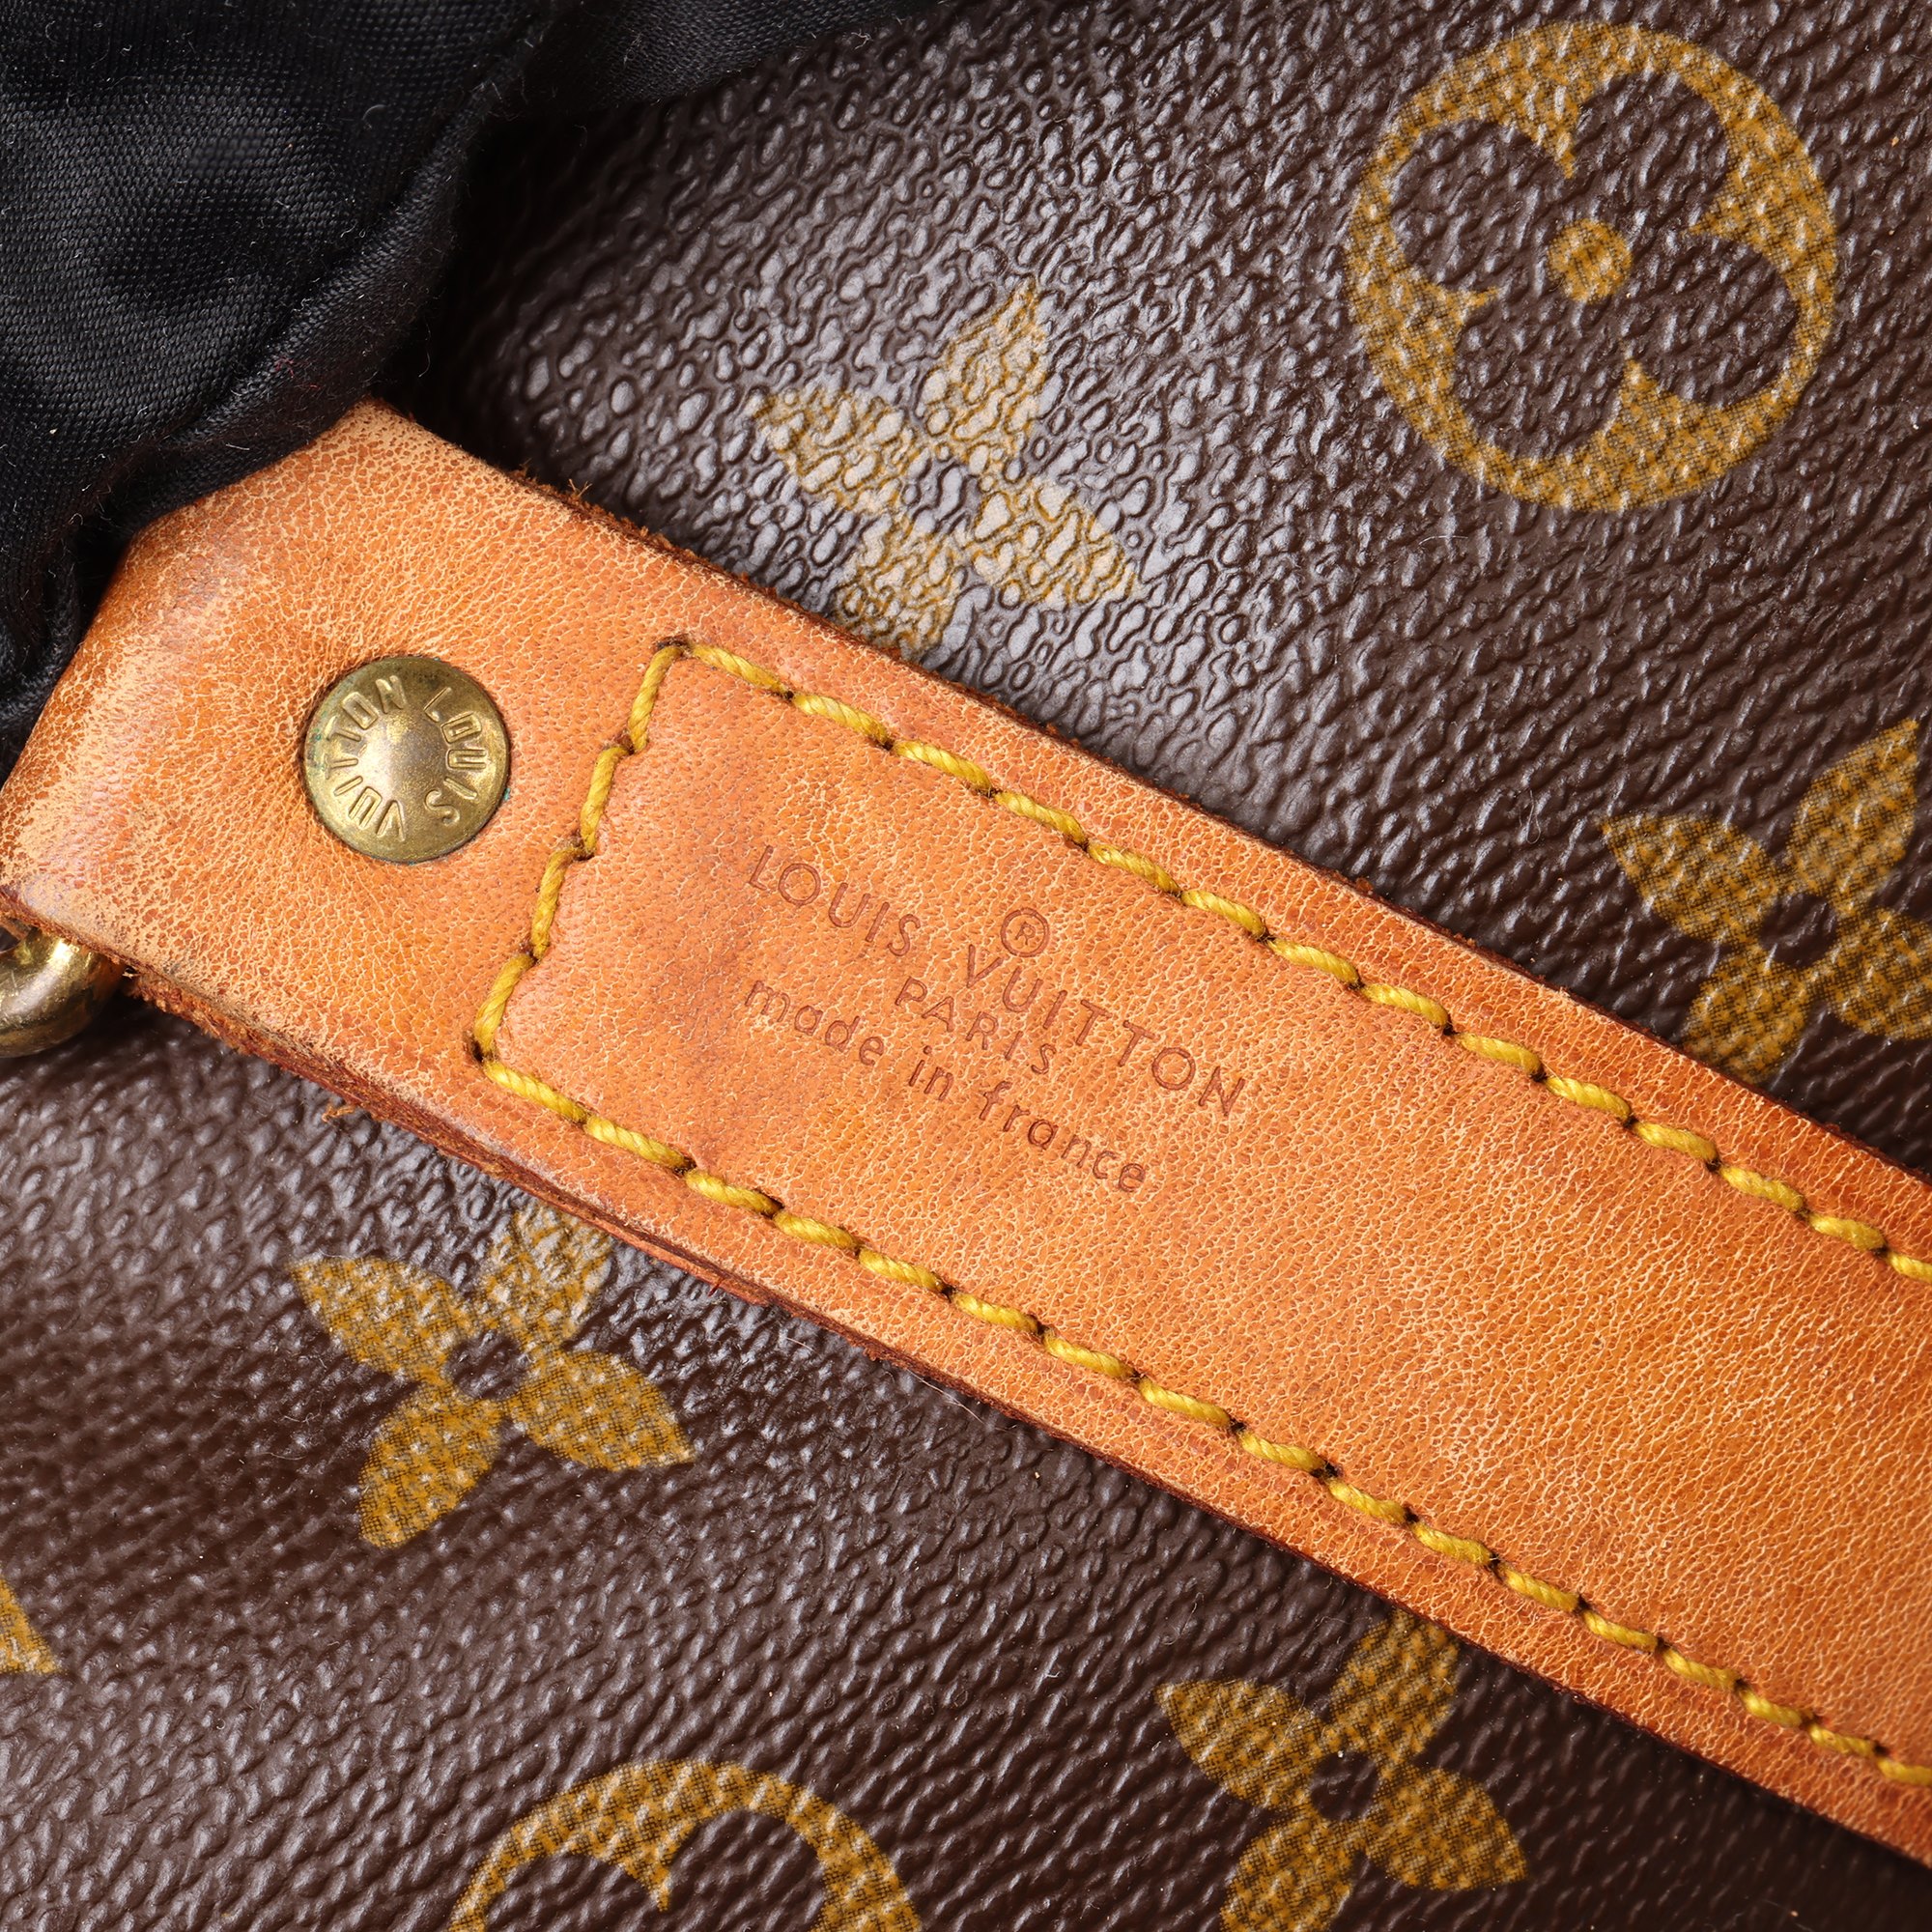 Louis Vuitton Brown Monogram Coated Canvas and Vachetta Leather Vintage Keepall 55 Bandoulière